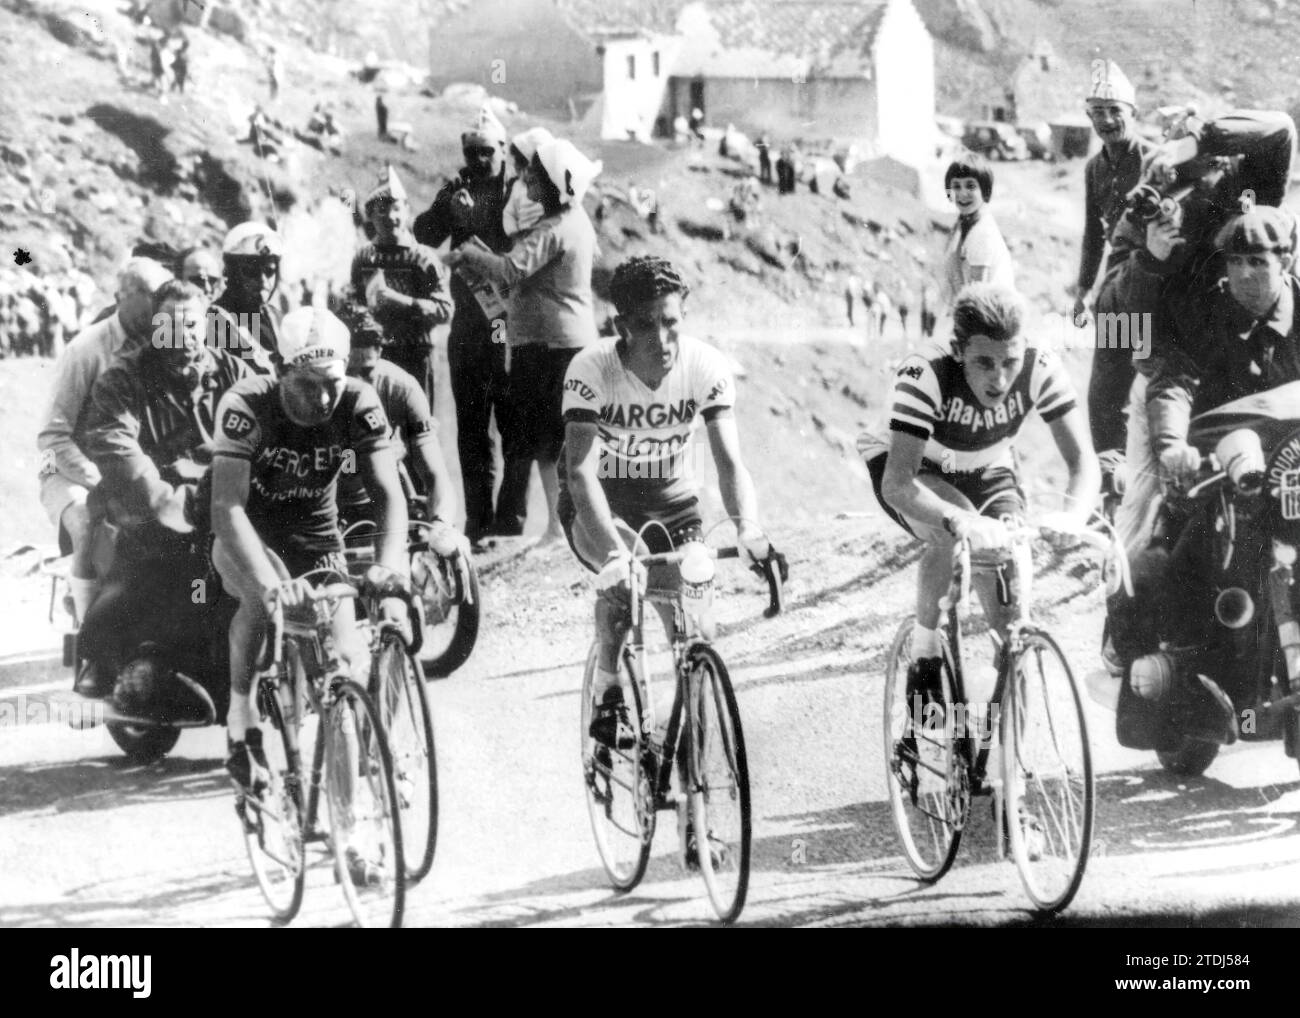 TOUR 1963. In the image three historic Tour riders climbing the Tourmalet. From left to right: Poulidor, Bahamontes and Anquetil. Credit: Album / Archivo ABC Stock Photo